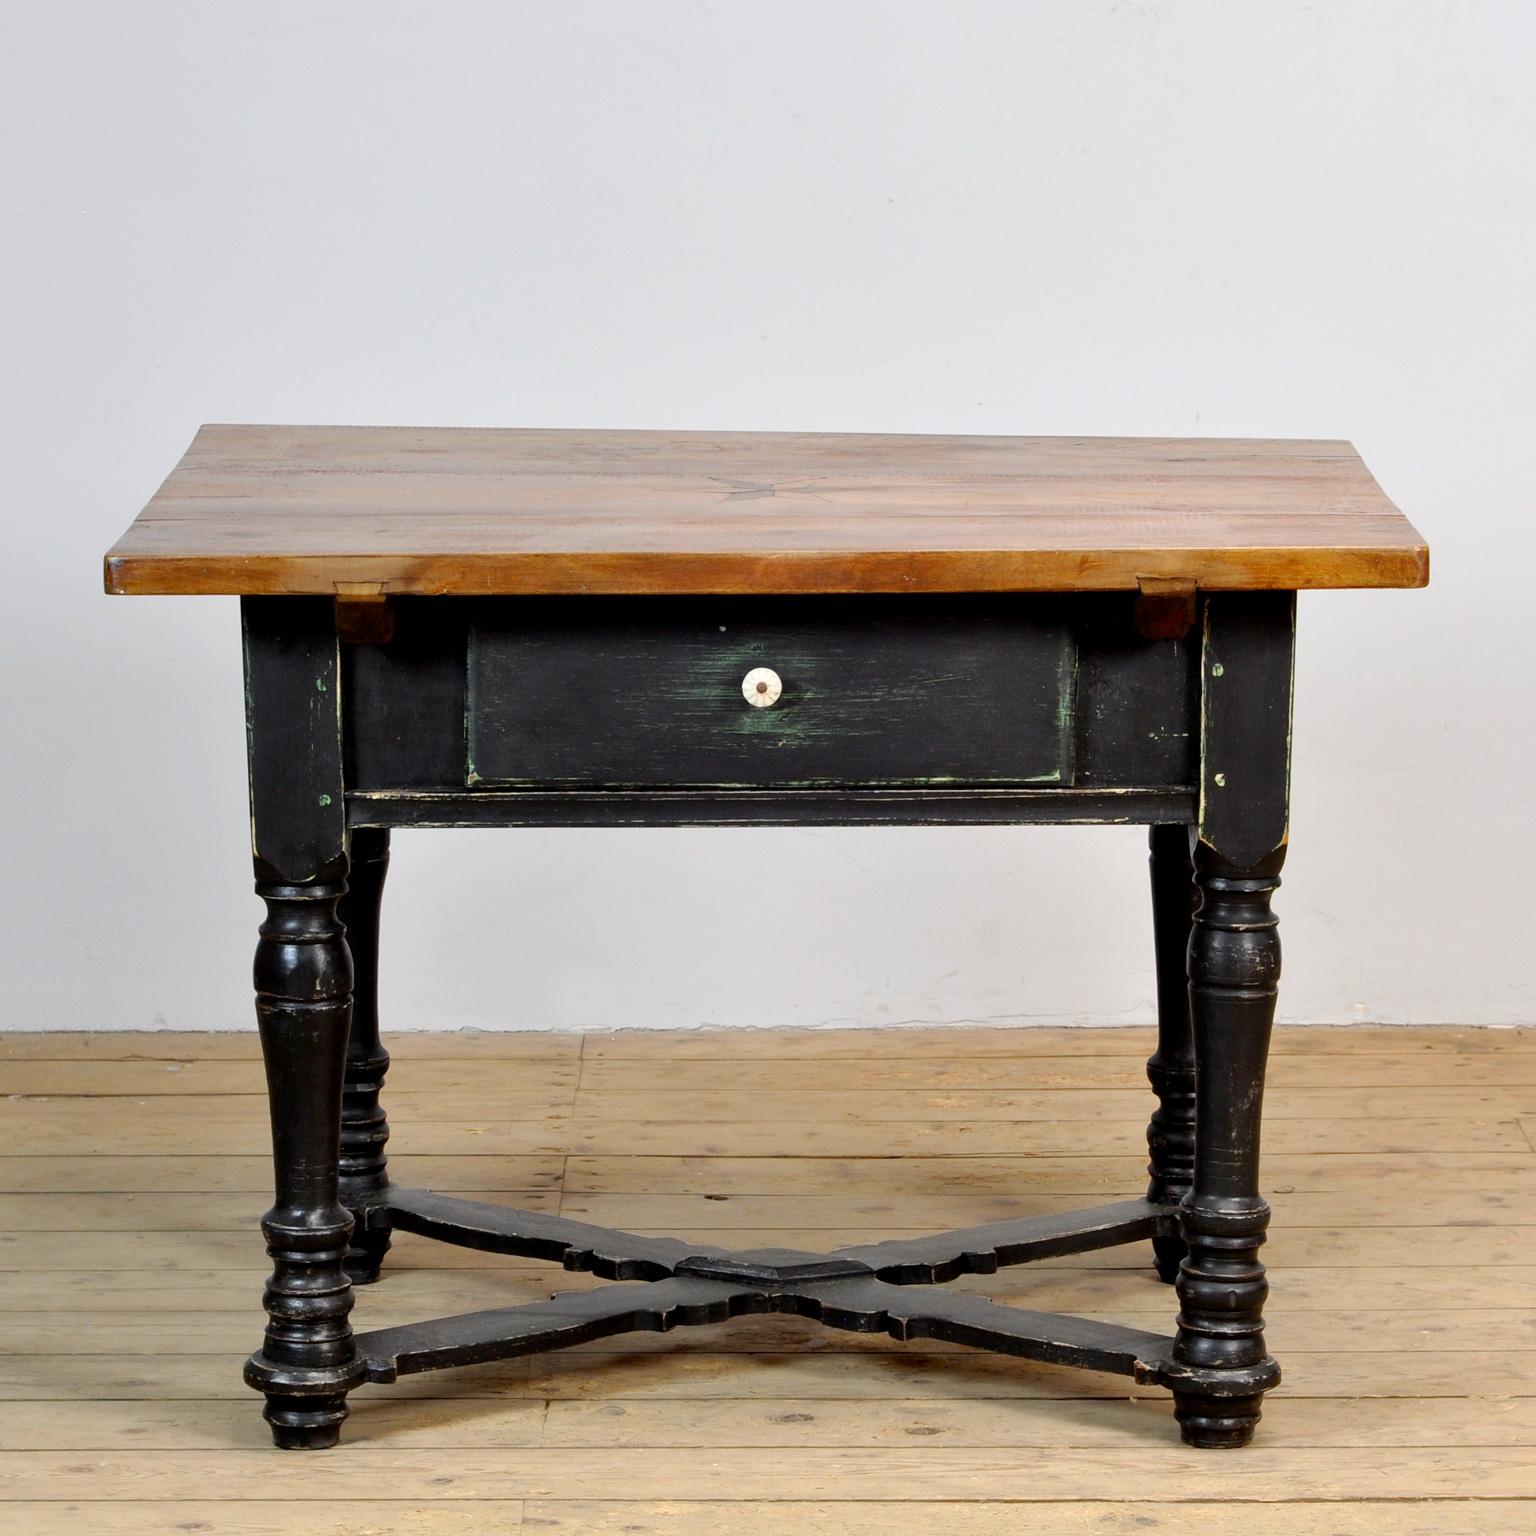 Table from the 1920s with one drawer. The table is made of pine with a top of oak. The top has a star inlay.